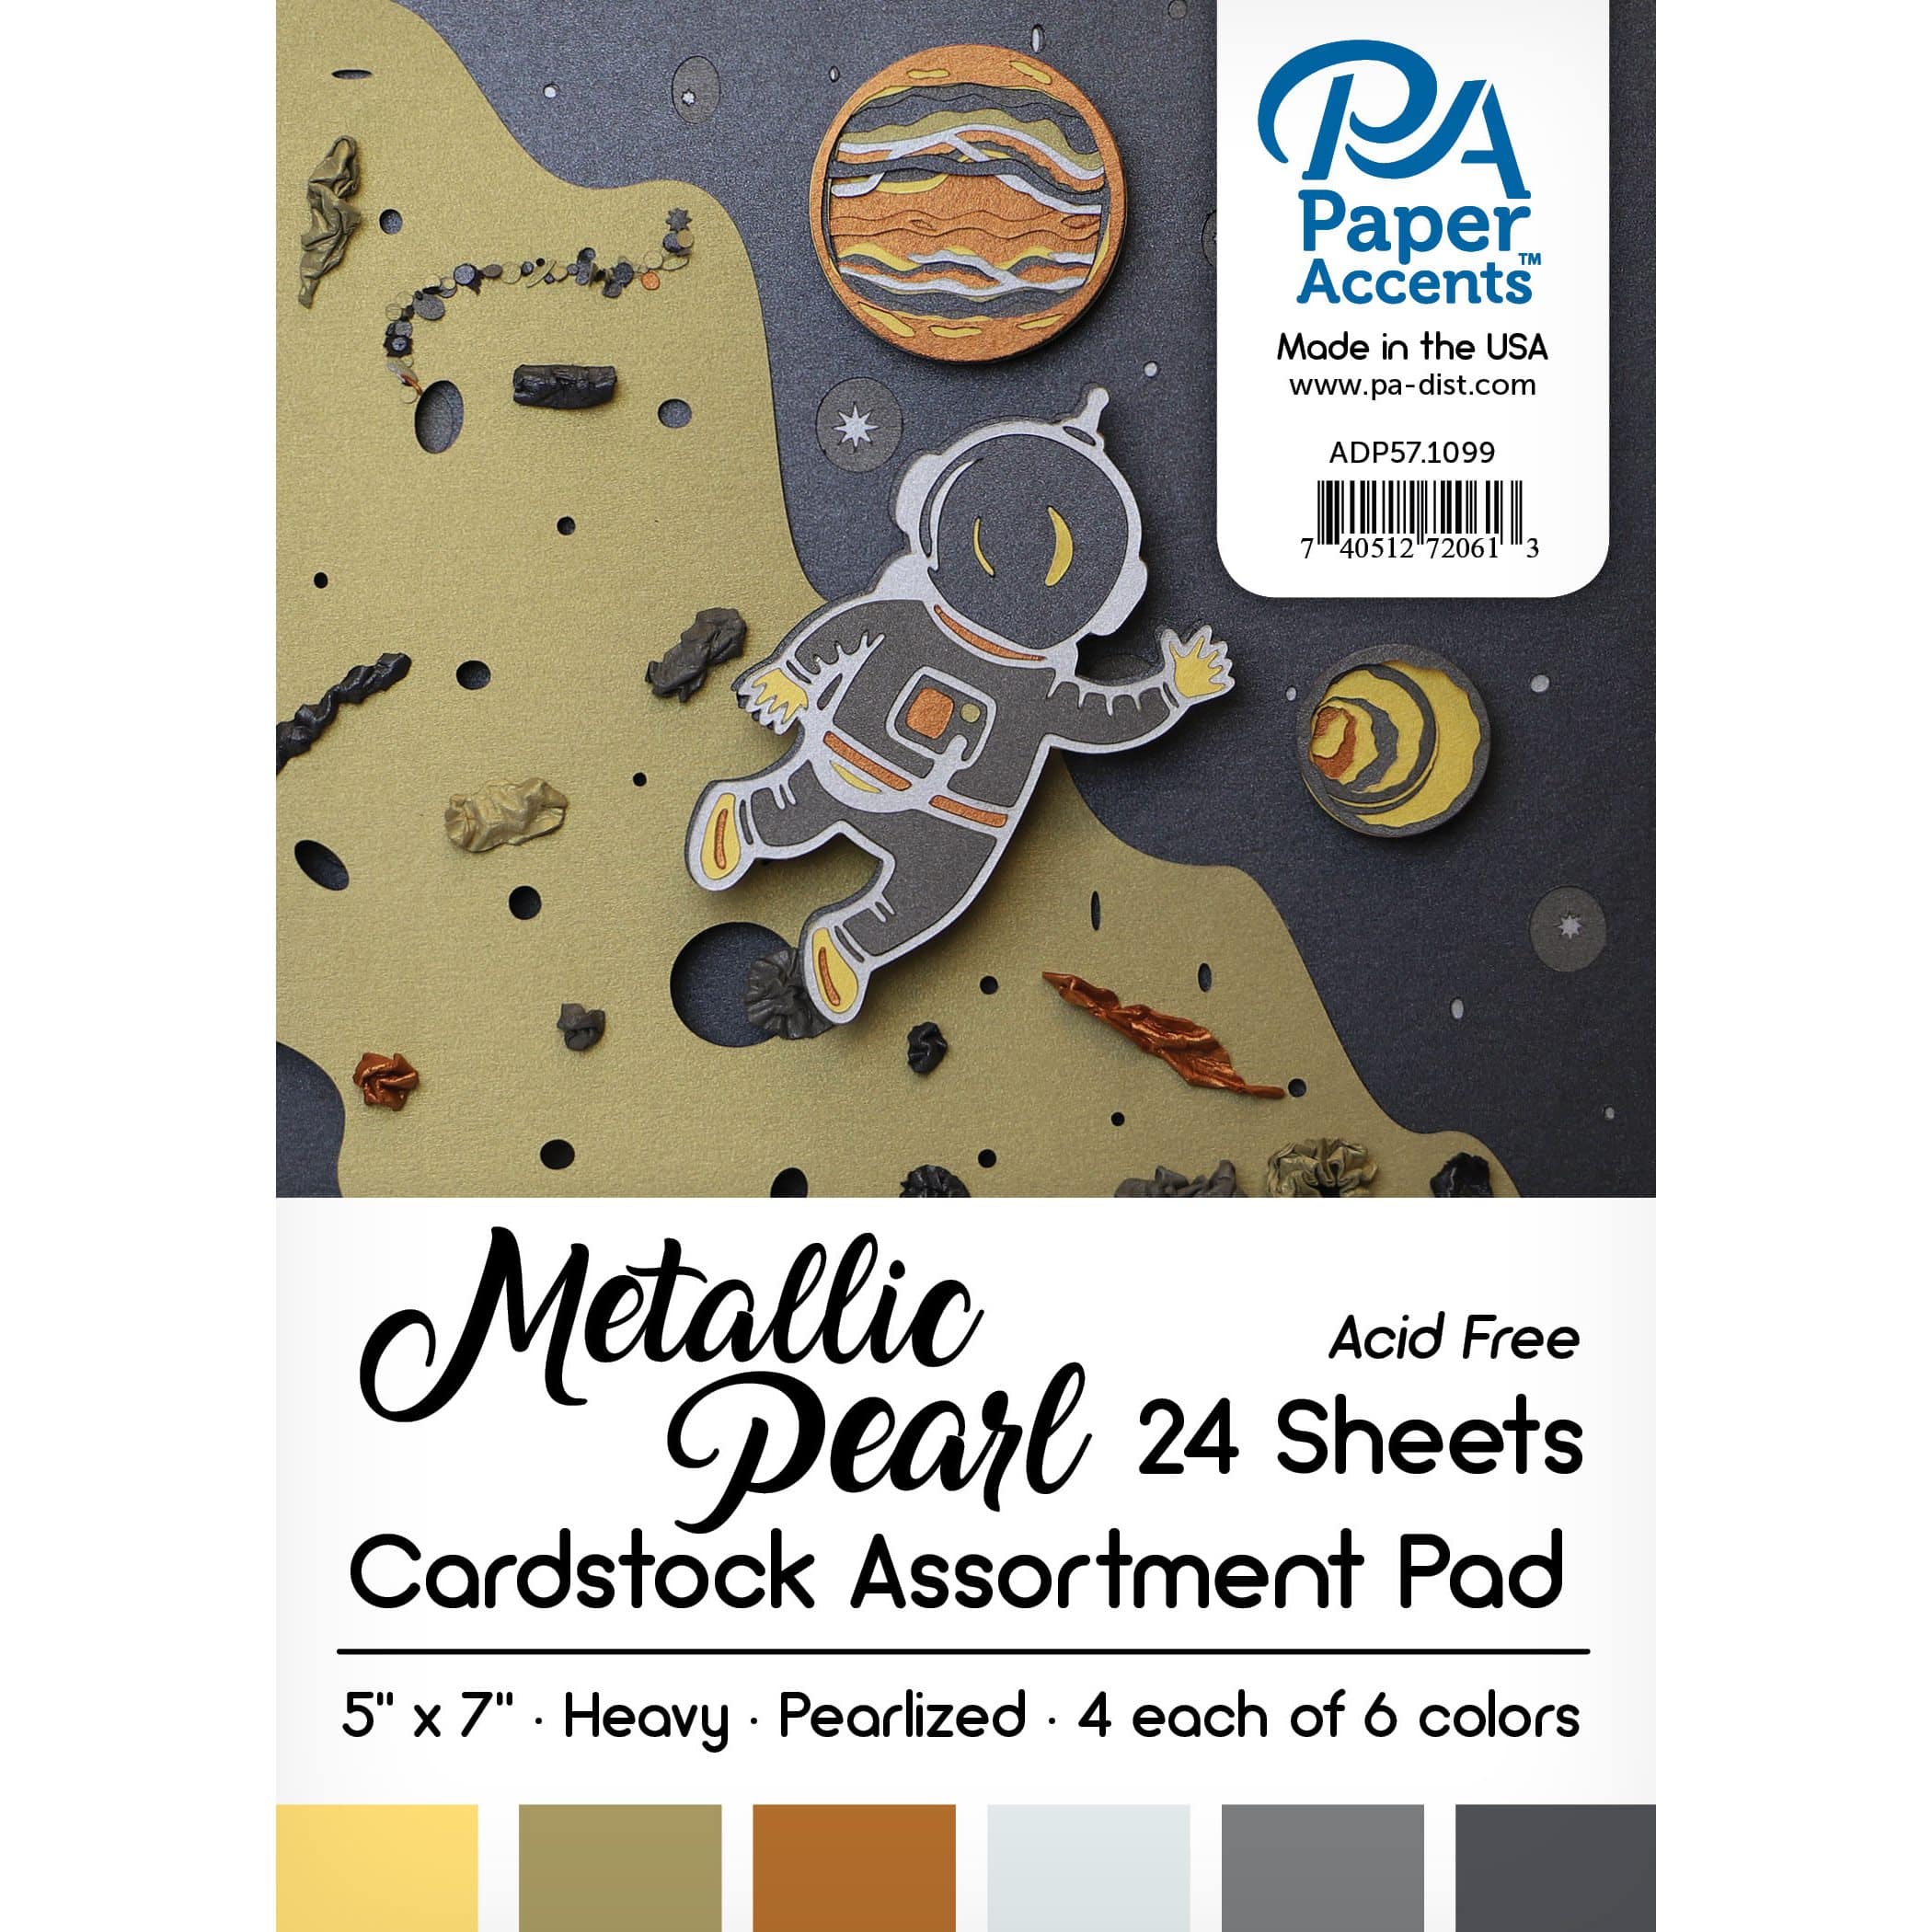 PA Paper™ Accents Metallic Pearl 5 x 7 Cardstock Pad, 24 Sheets